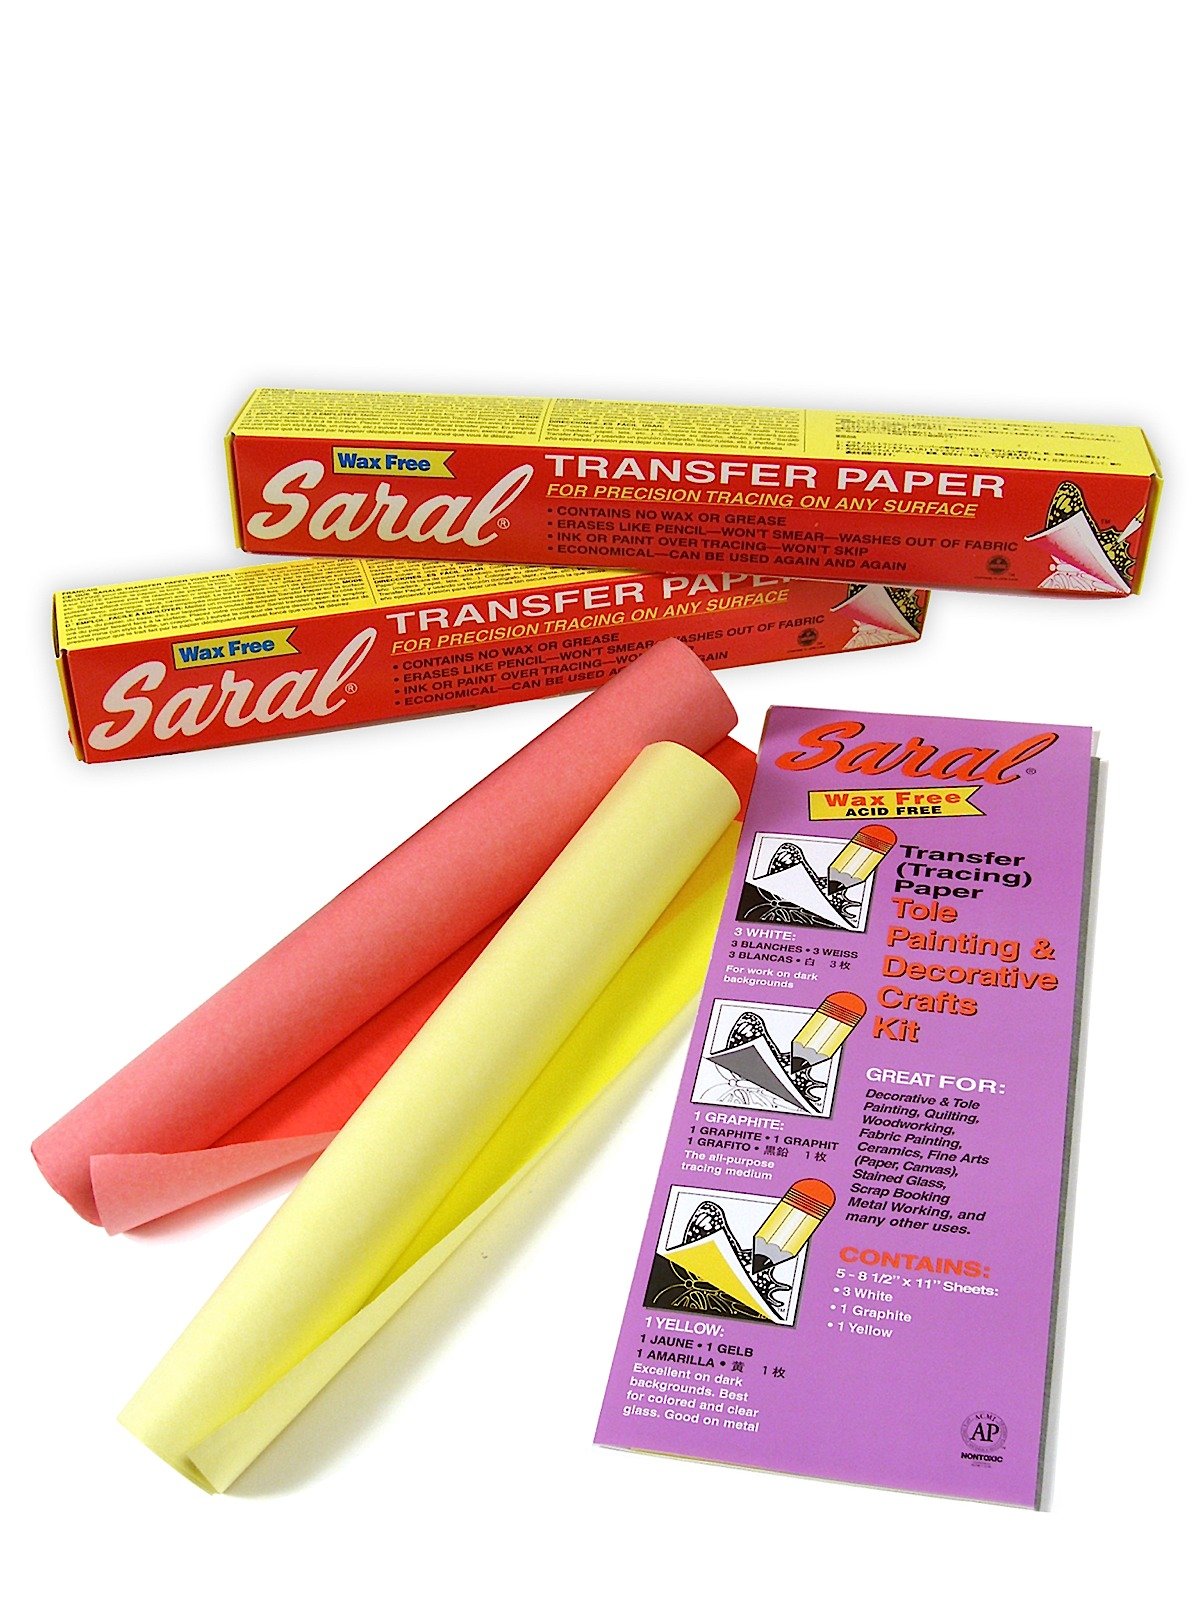 SARAL Transfer Paper Sampler 5 Colors ~ White, Graphite, Yellow, Blue, Red